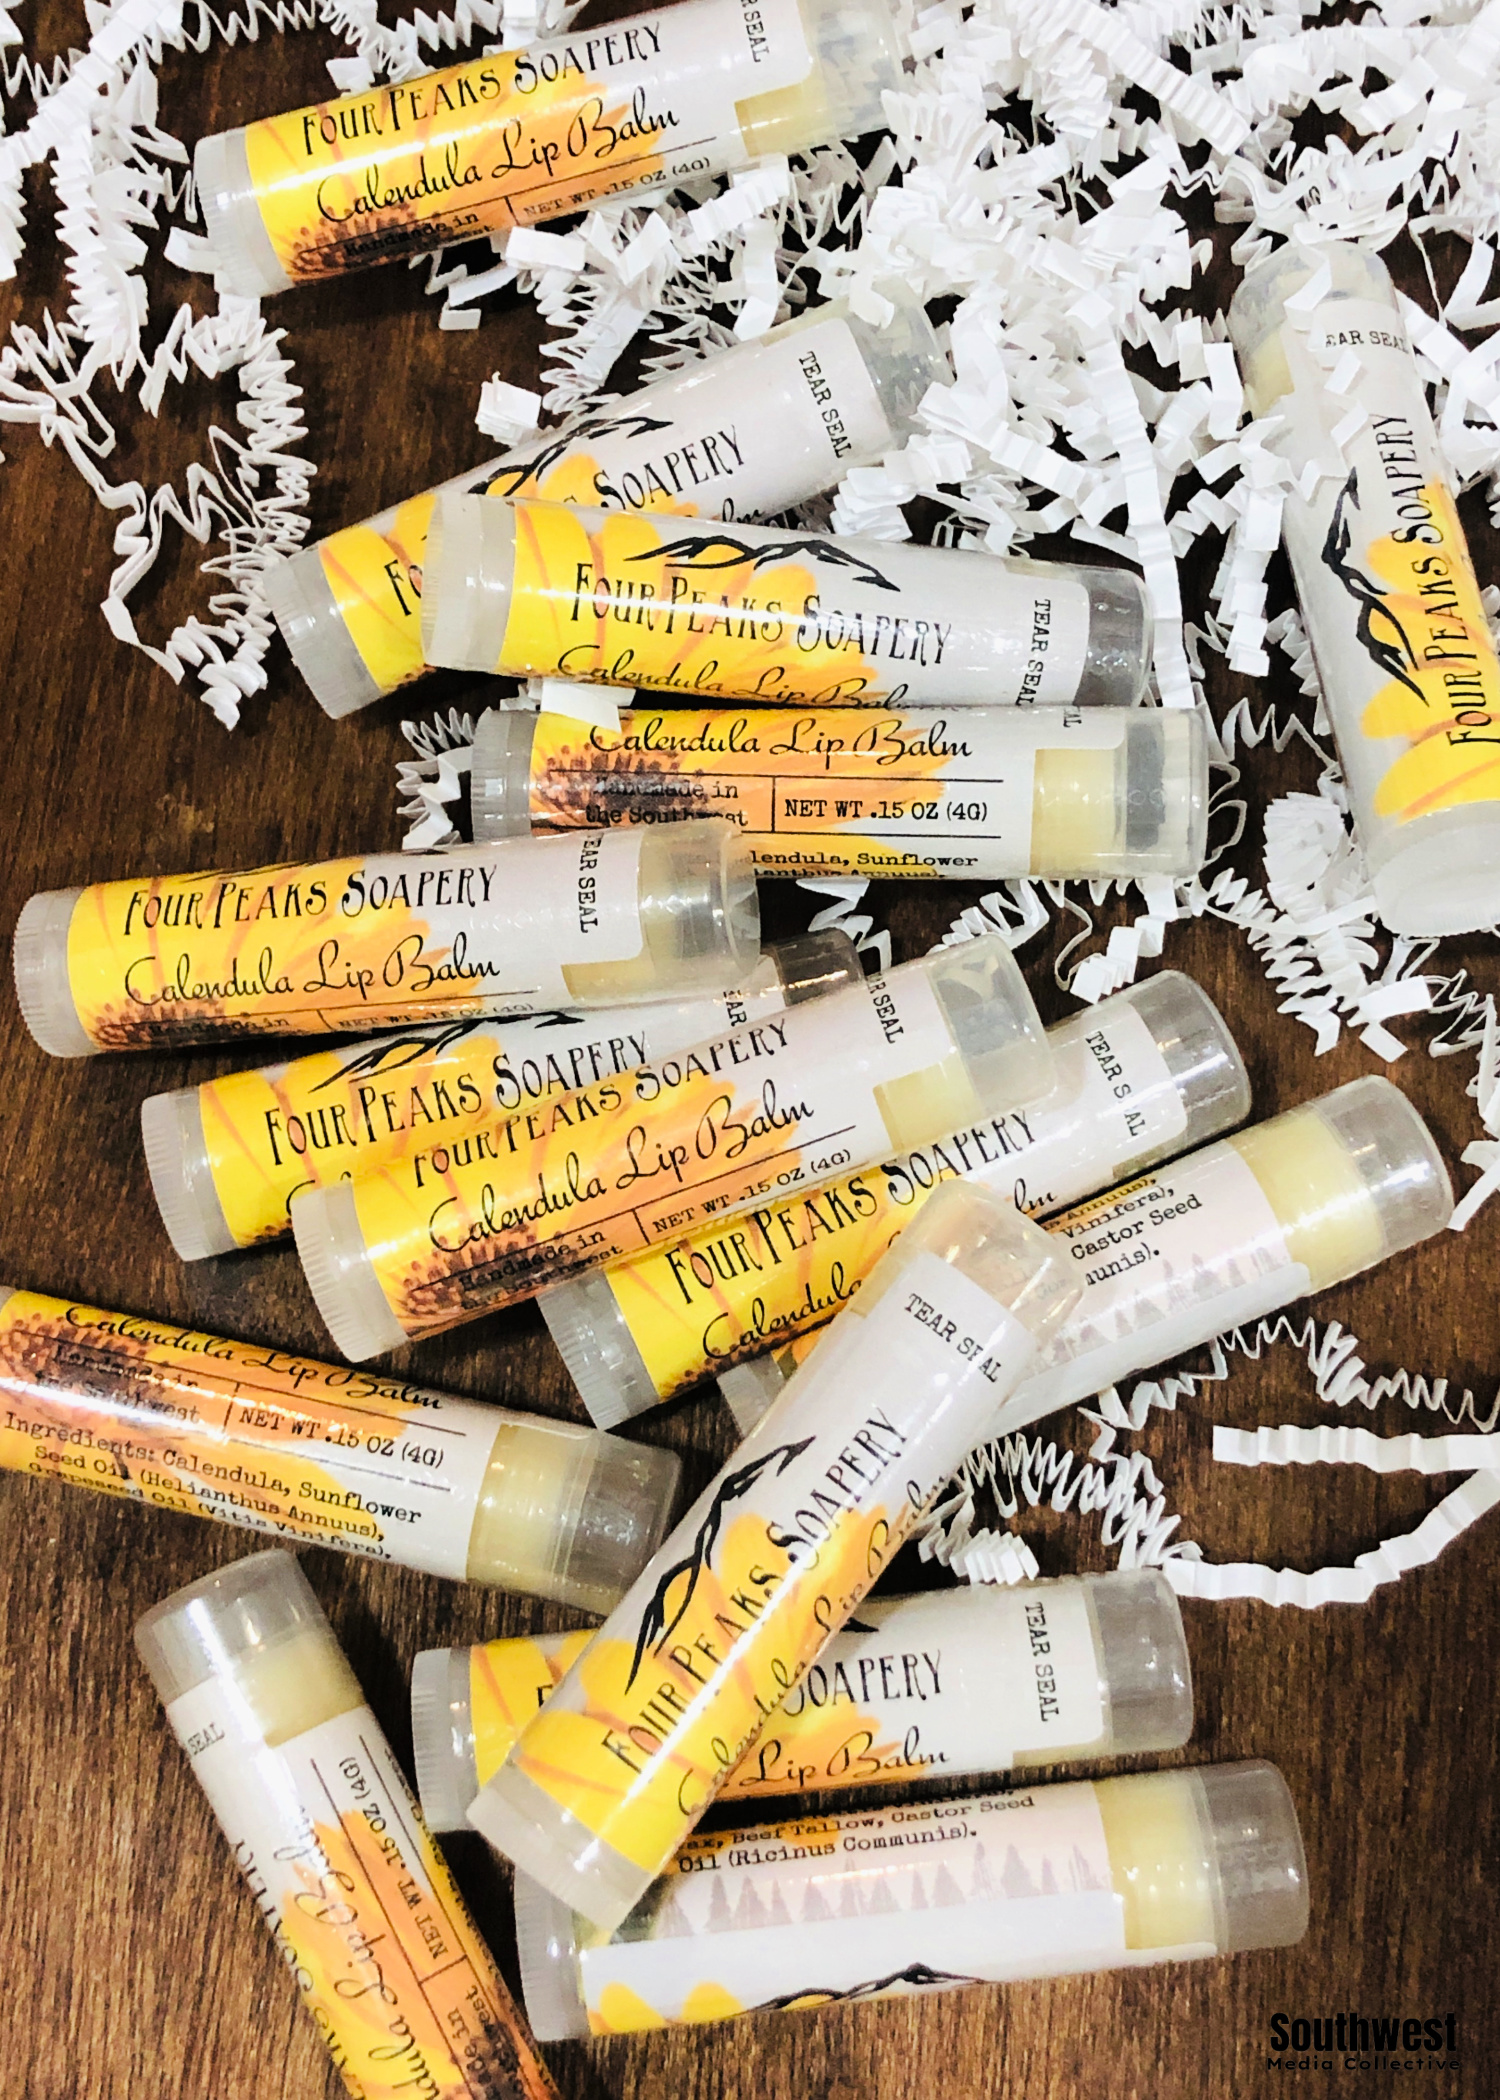 Grab this simple DIY to make Calendula Lip Balm - gentle and nourishing lip balm that is perfect for family, friends, and even gifts!